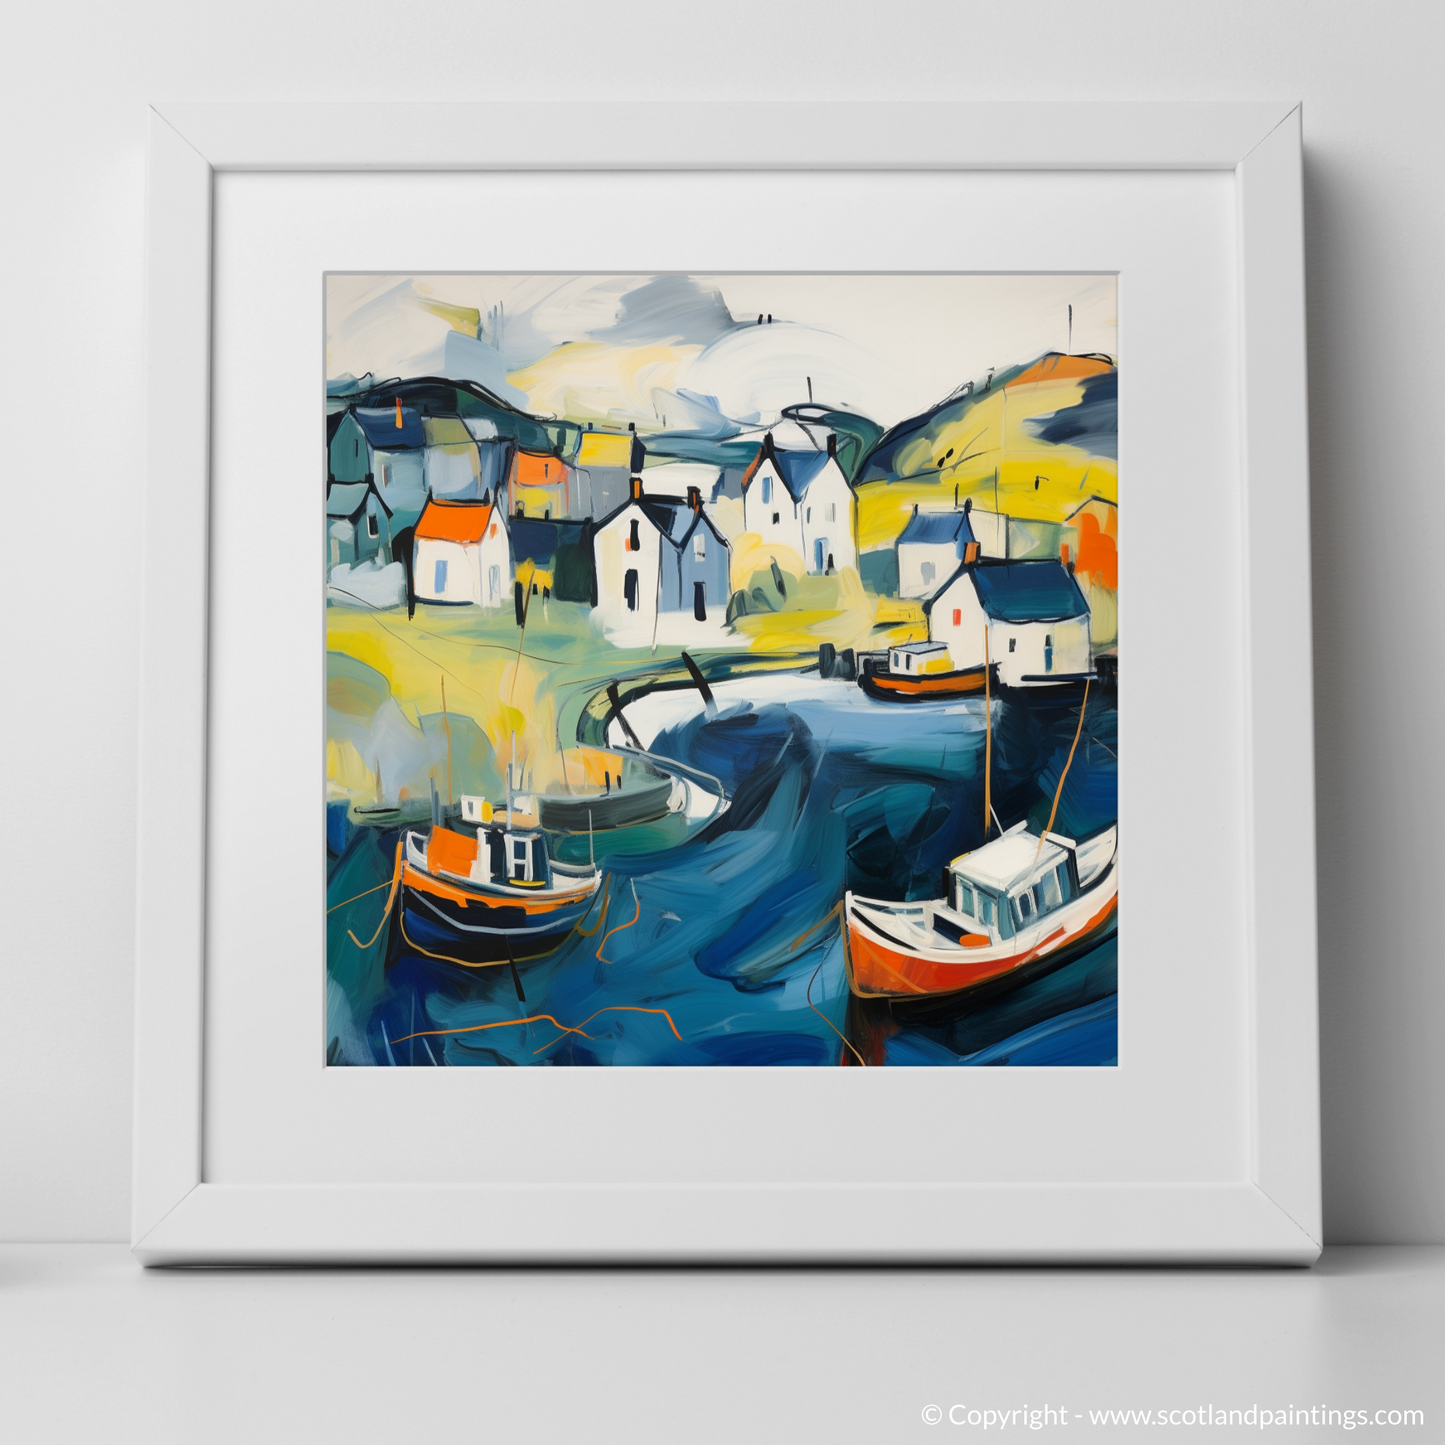 Harbour Hues: An Abstract Ode to Port Ellen